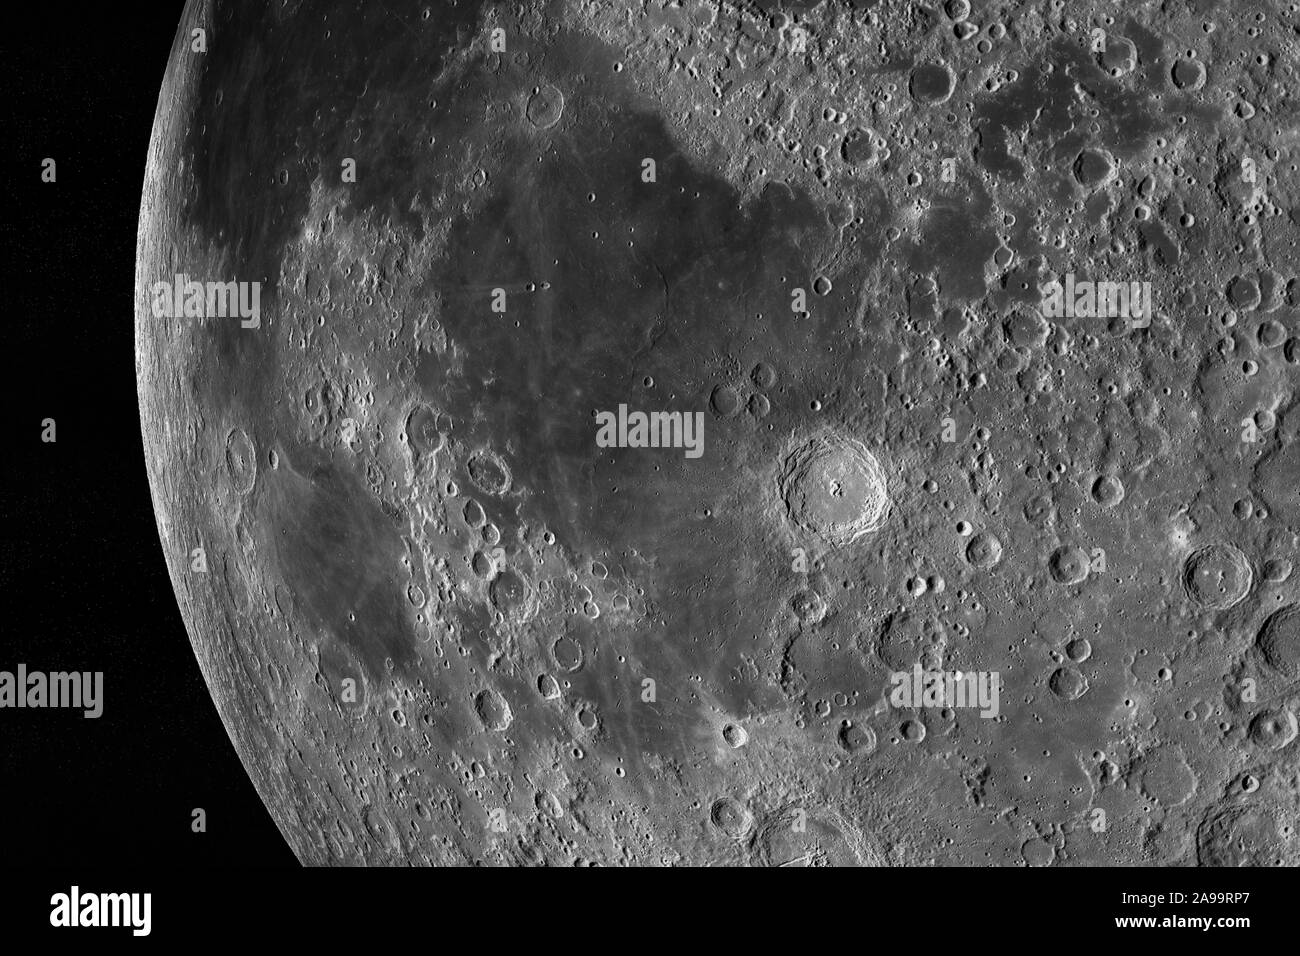 Mare Fecunditatis or Sea of Fertility in the lunar surface of the moon Stock Photo